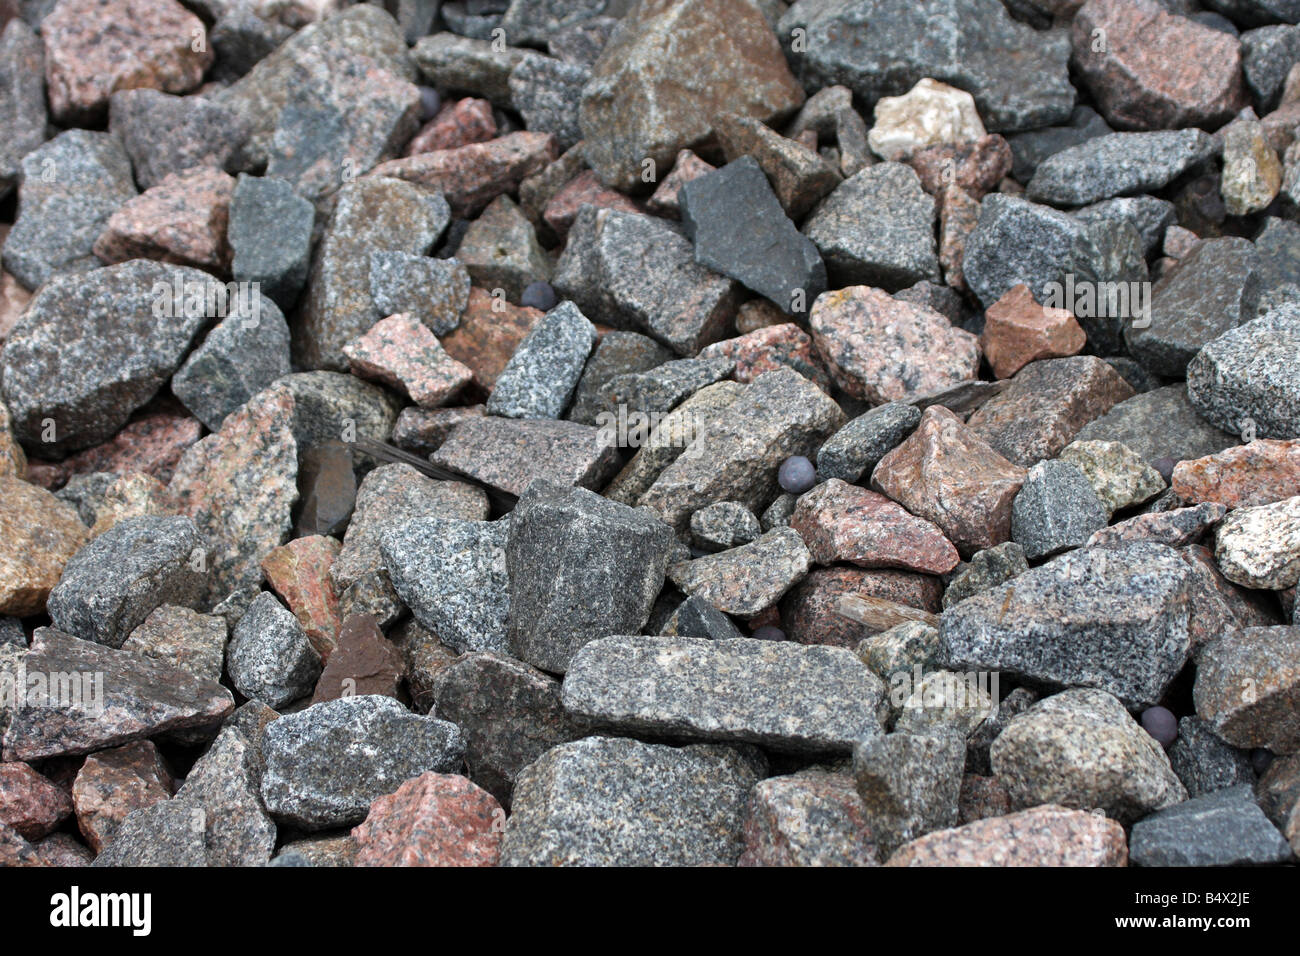 Granite stones and rocks in the bed of a railroad ties with iron ore pellet Stock Photo